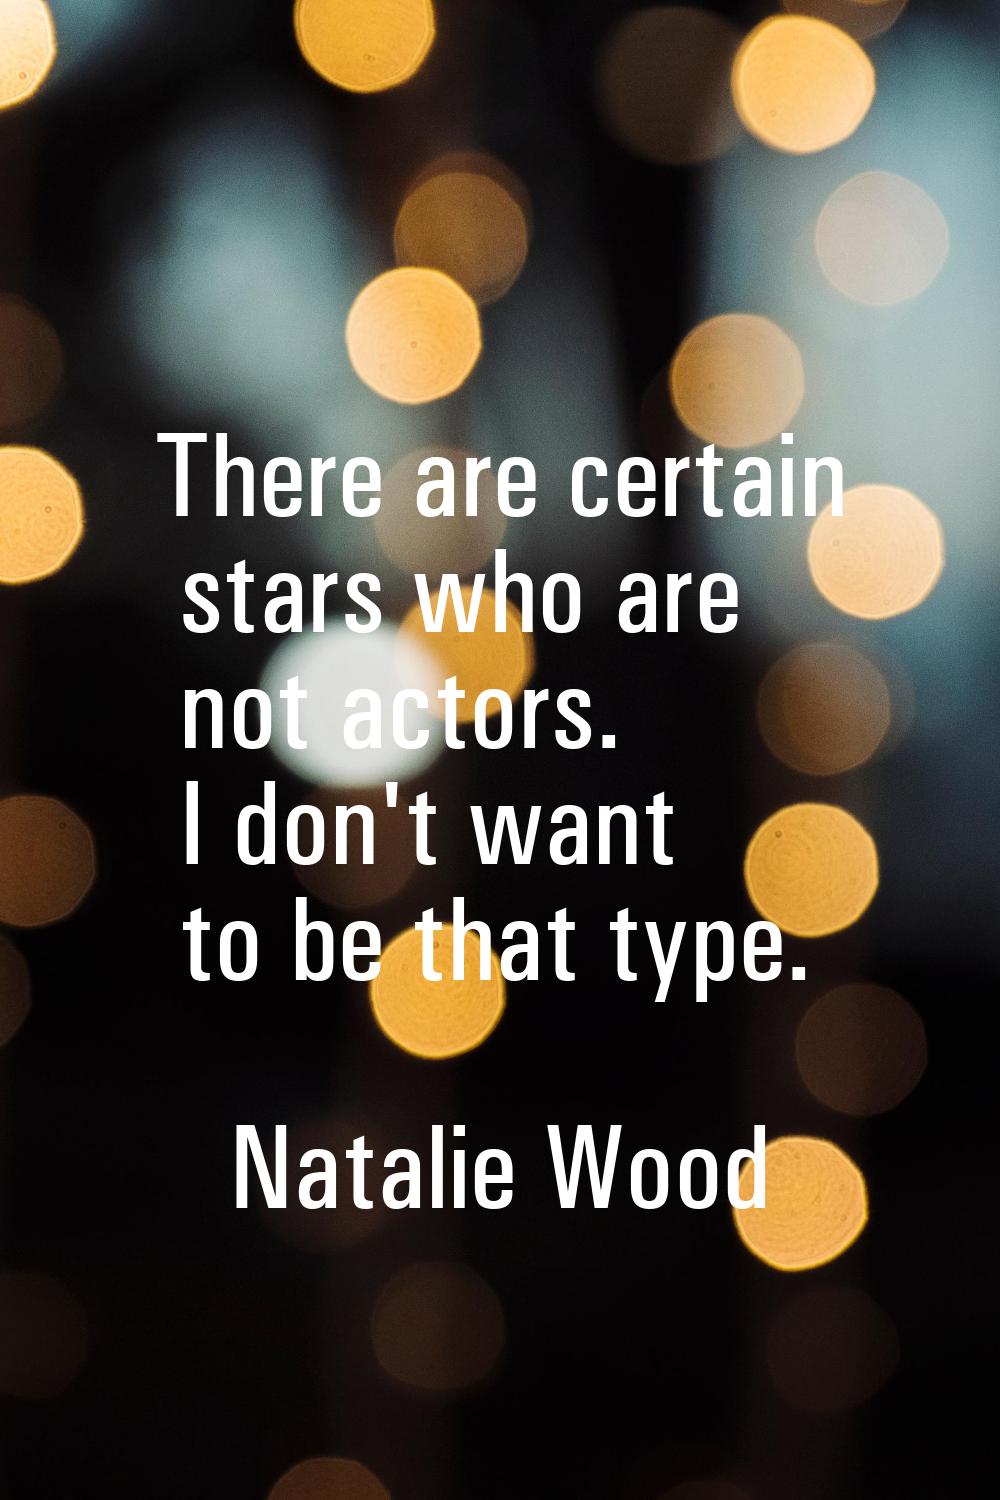 There are certain stars who are not actors. I don't want to be that type.